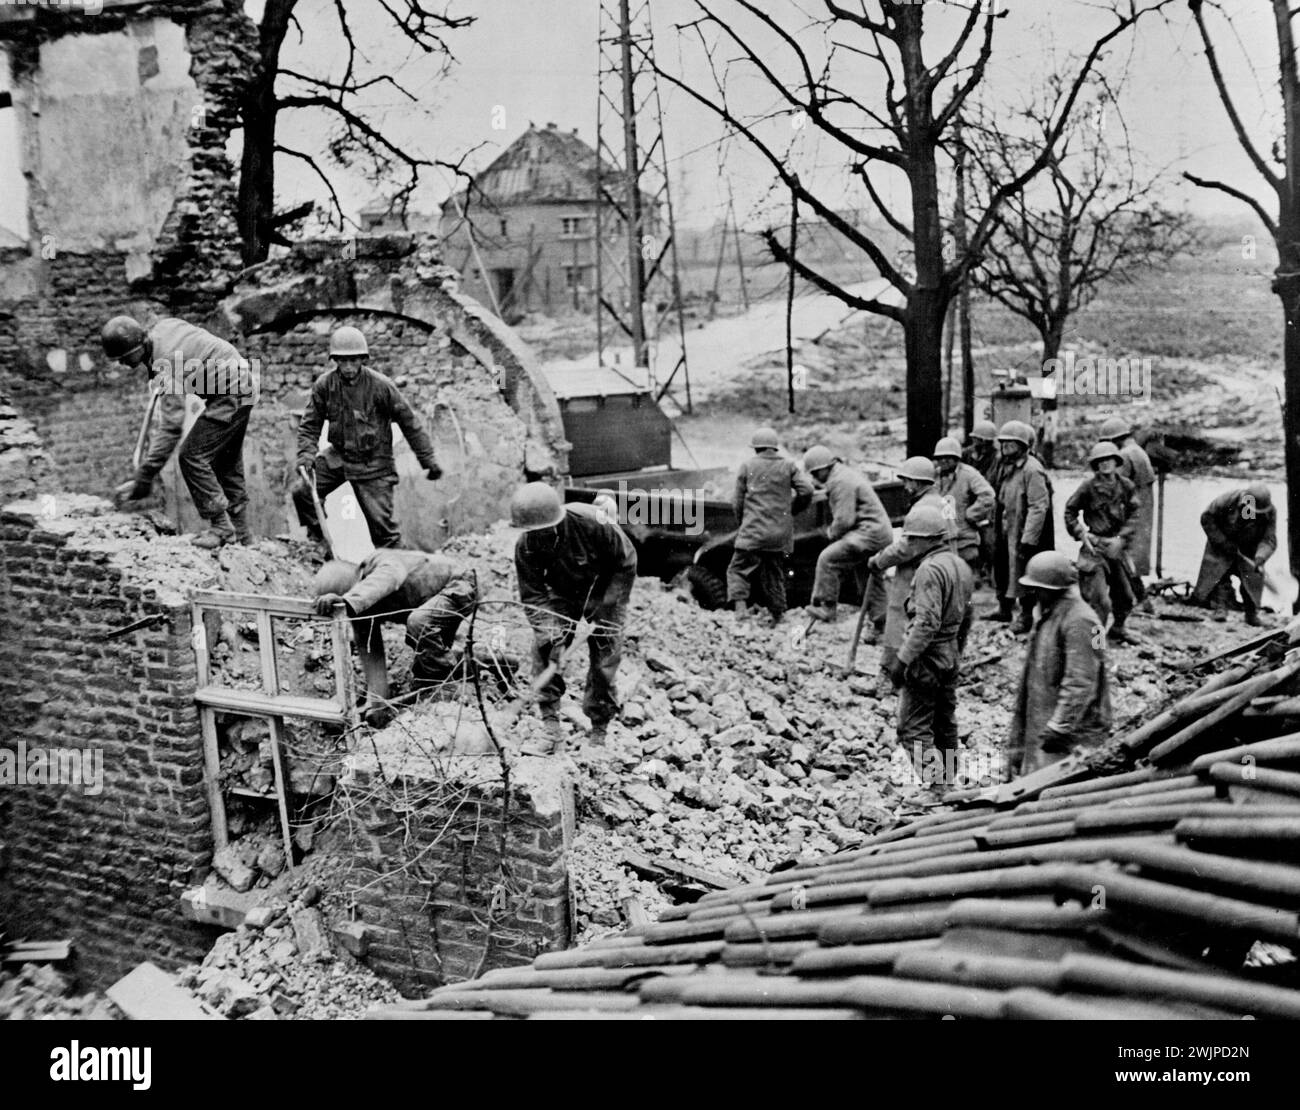 German Bricks Aid Allied Advance Inside Reich -- Engineers of the Ninth U.S. Army demolish a wall in Ubach, Germany, and load the debris onto trucks, to be used for repairing roads to aid the allied advance inside the Reich, U.S. January 8, 1945. (Photo by U.S. Office Of War information Picture). Stock Photo